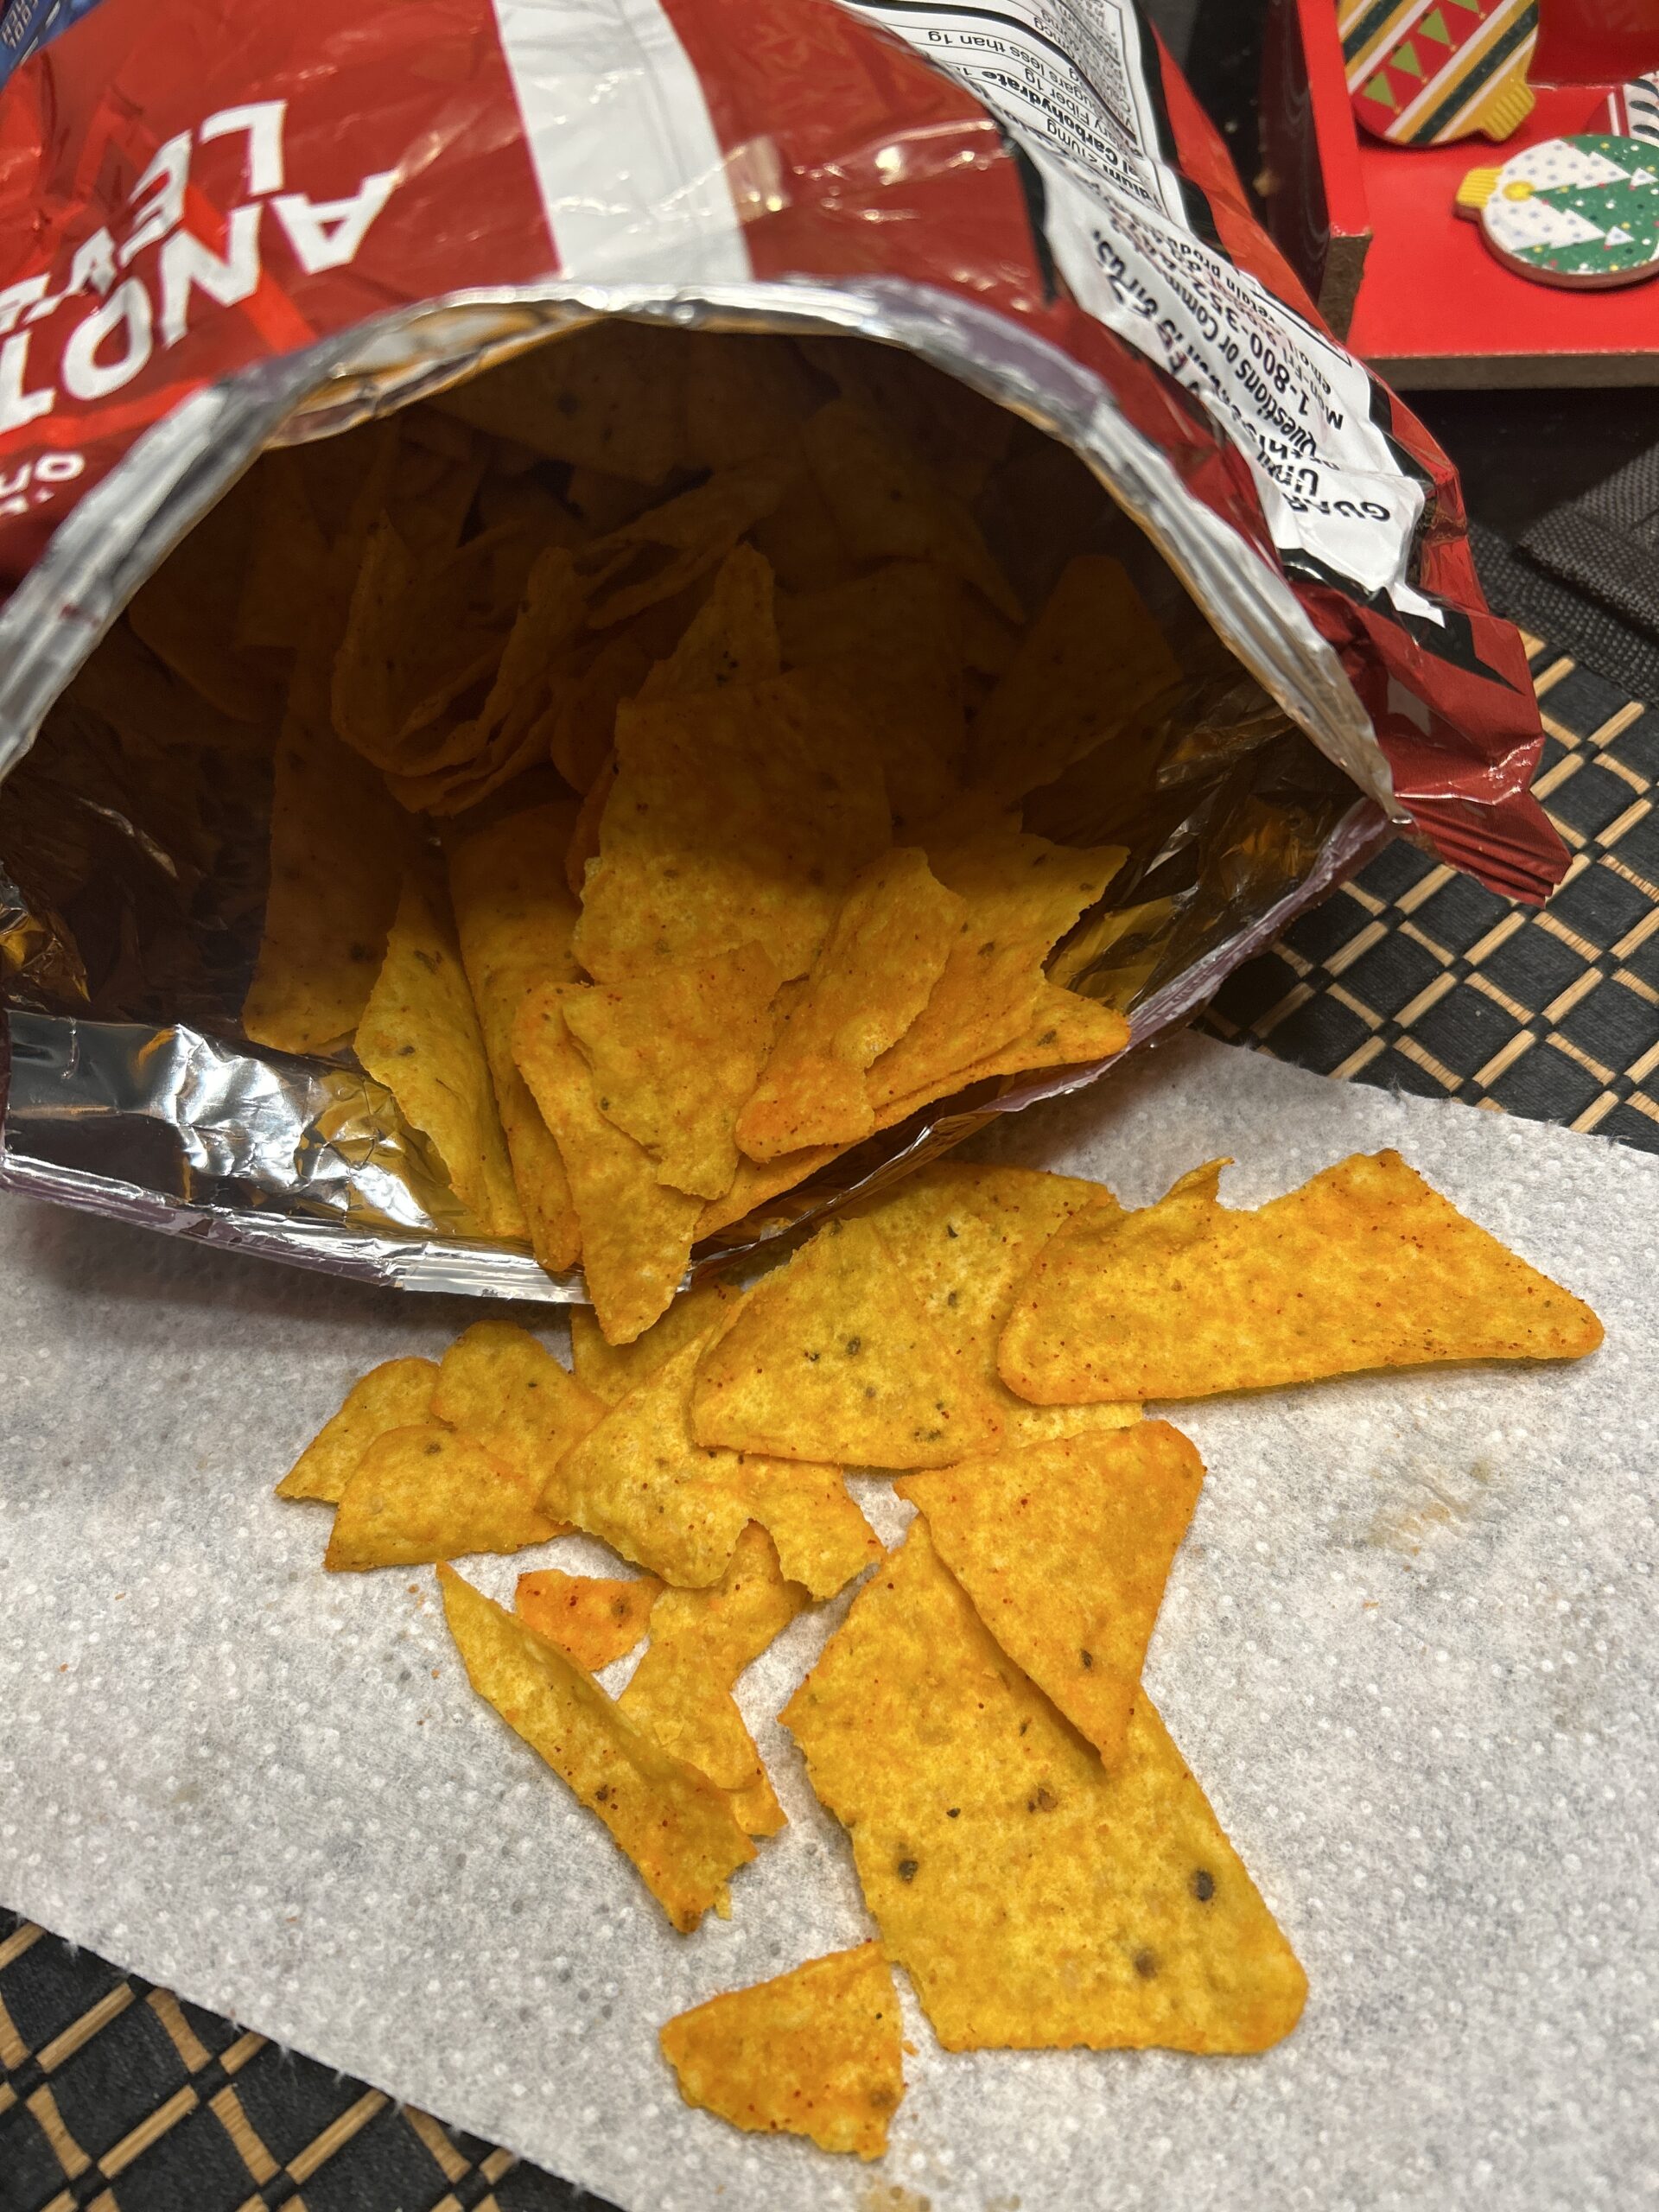 Doritos complaint Not enough Cheese in the chips